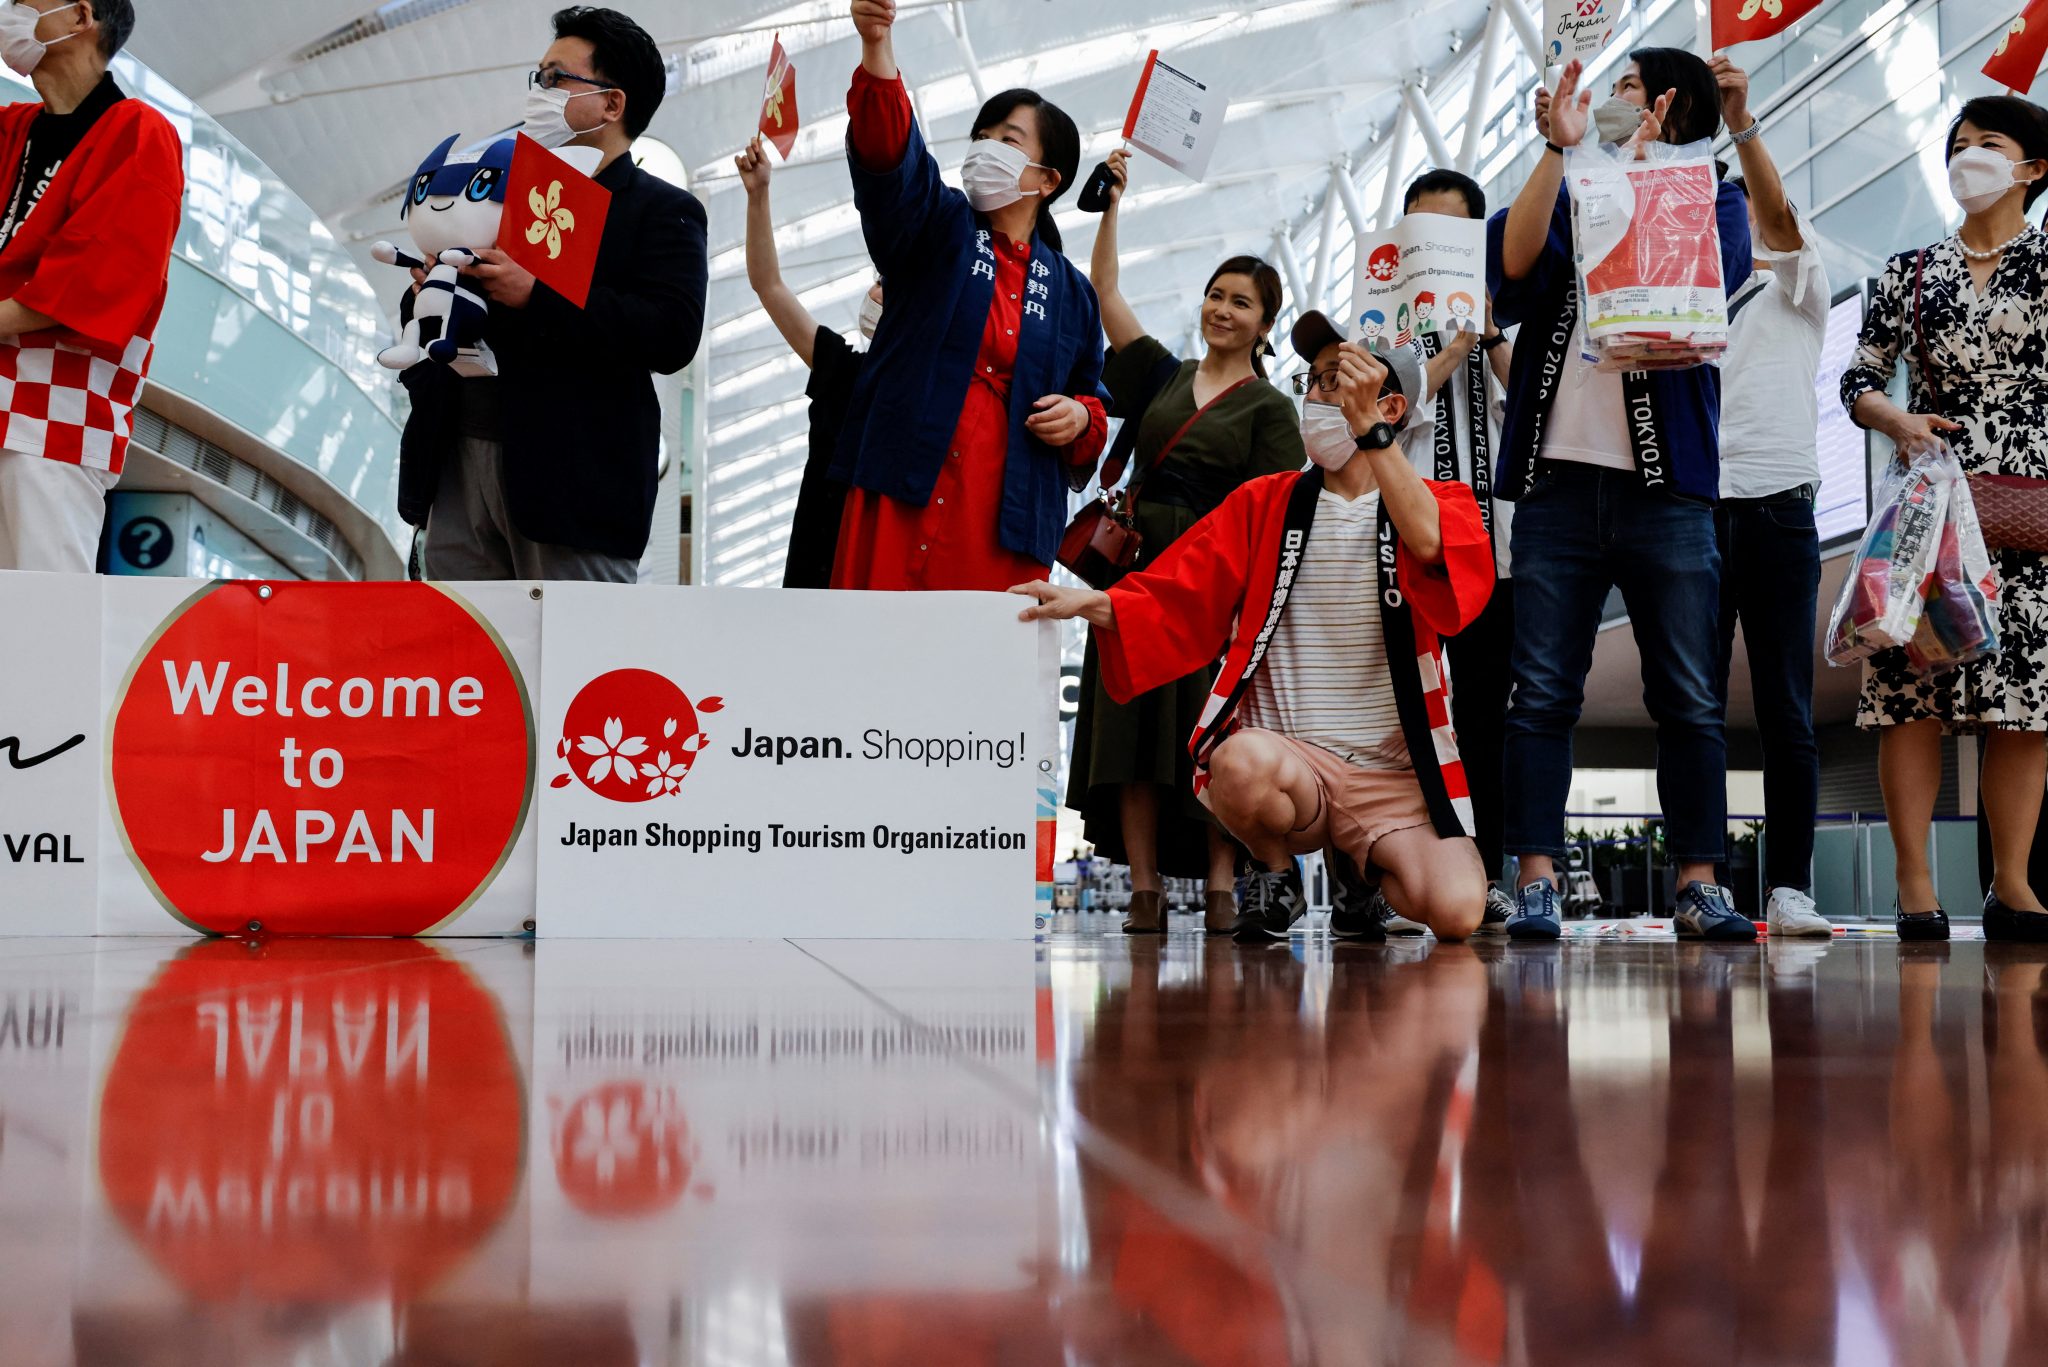 The prospects of Japan’s post-pandemic tourism